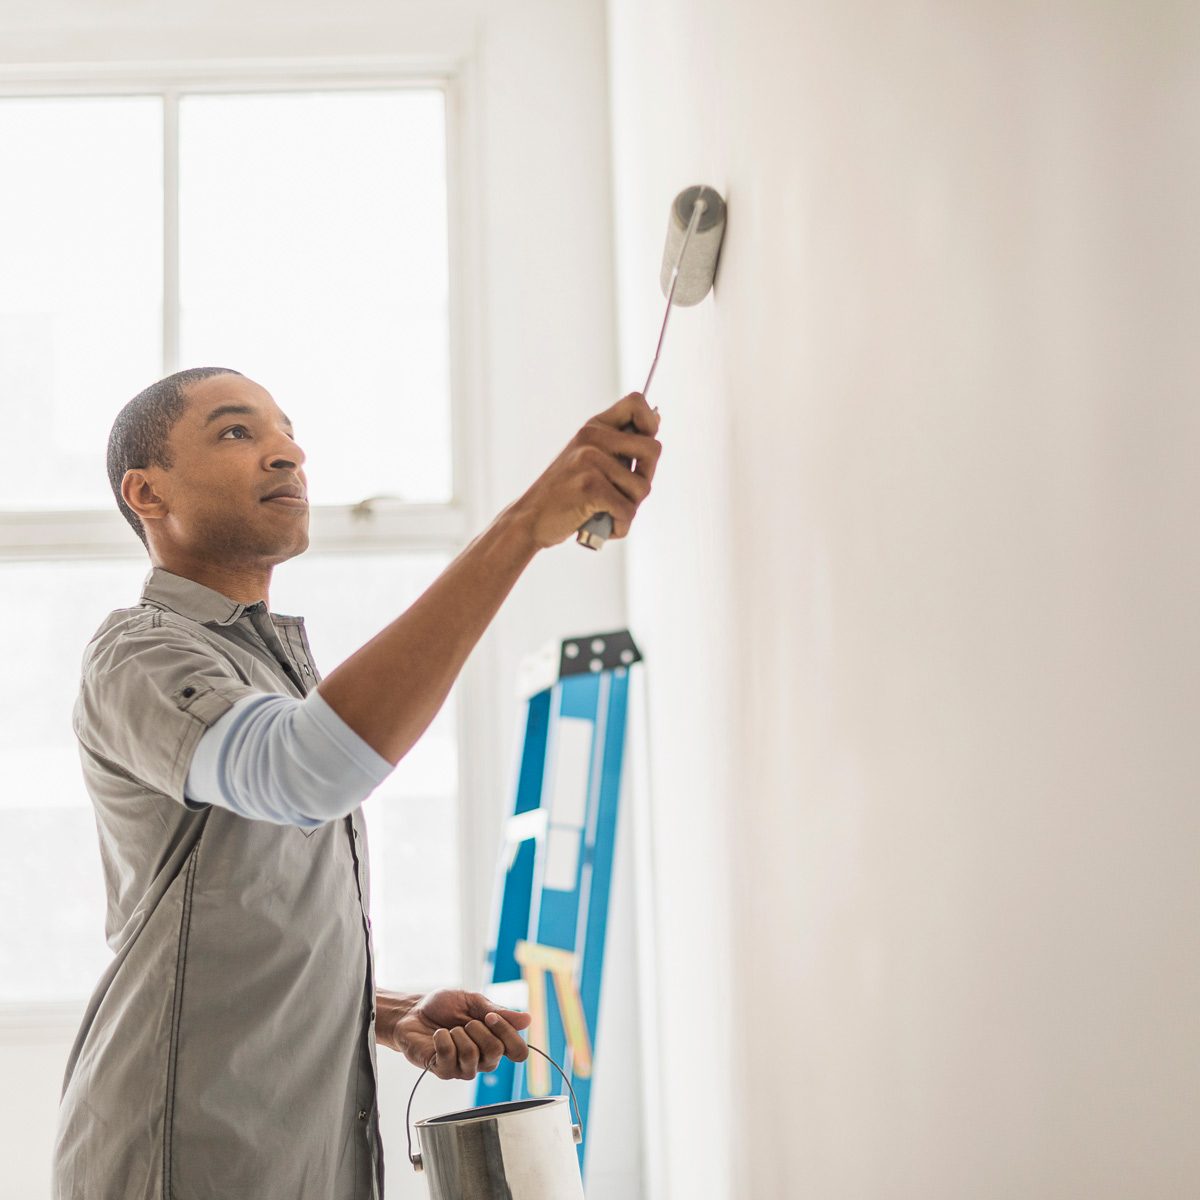 New paint makes tough self-cleaning surfaces